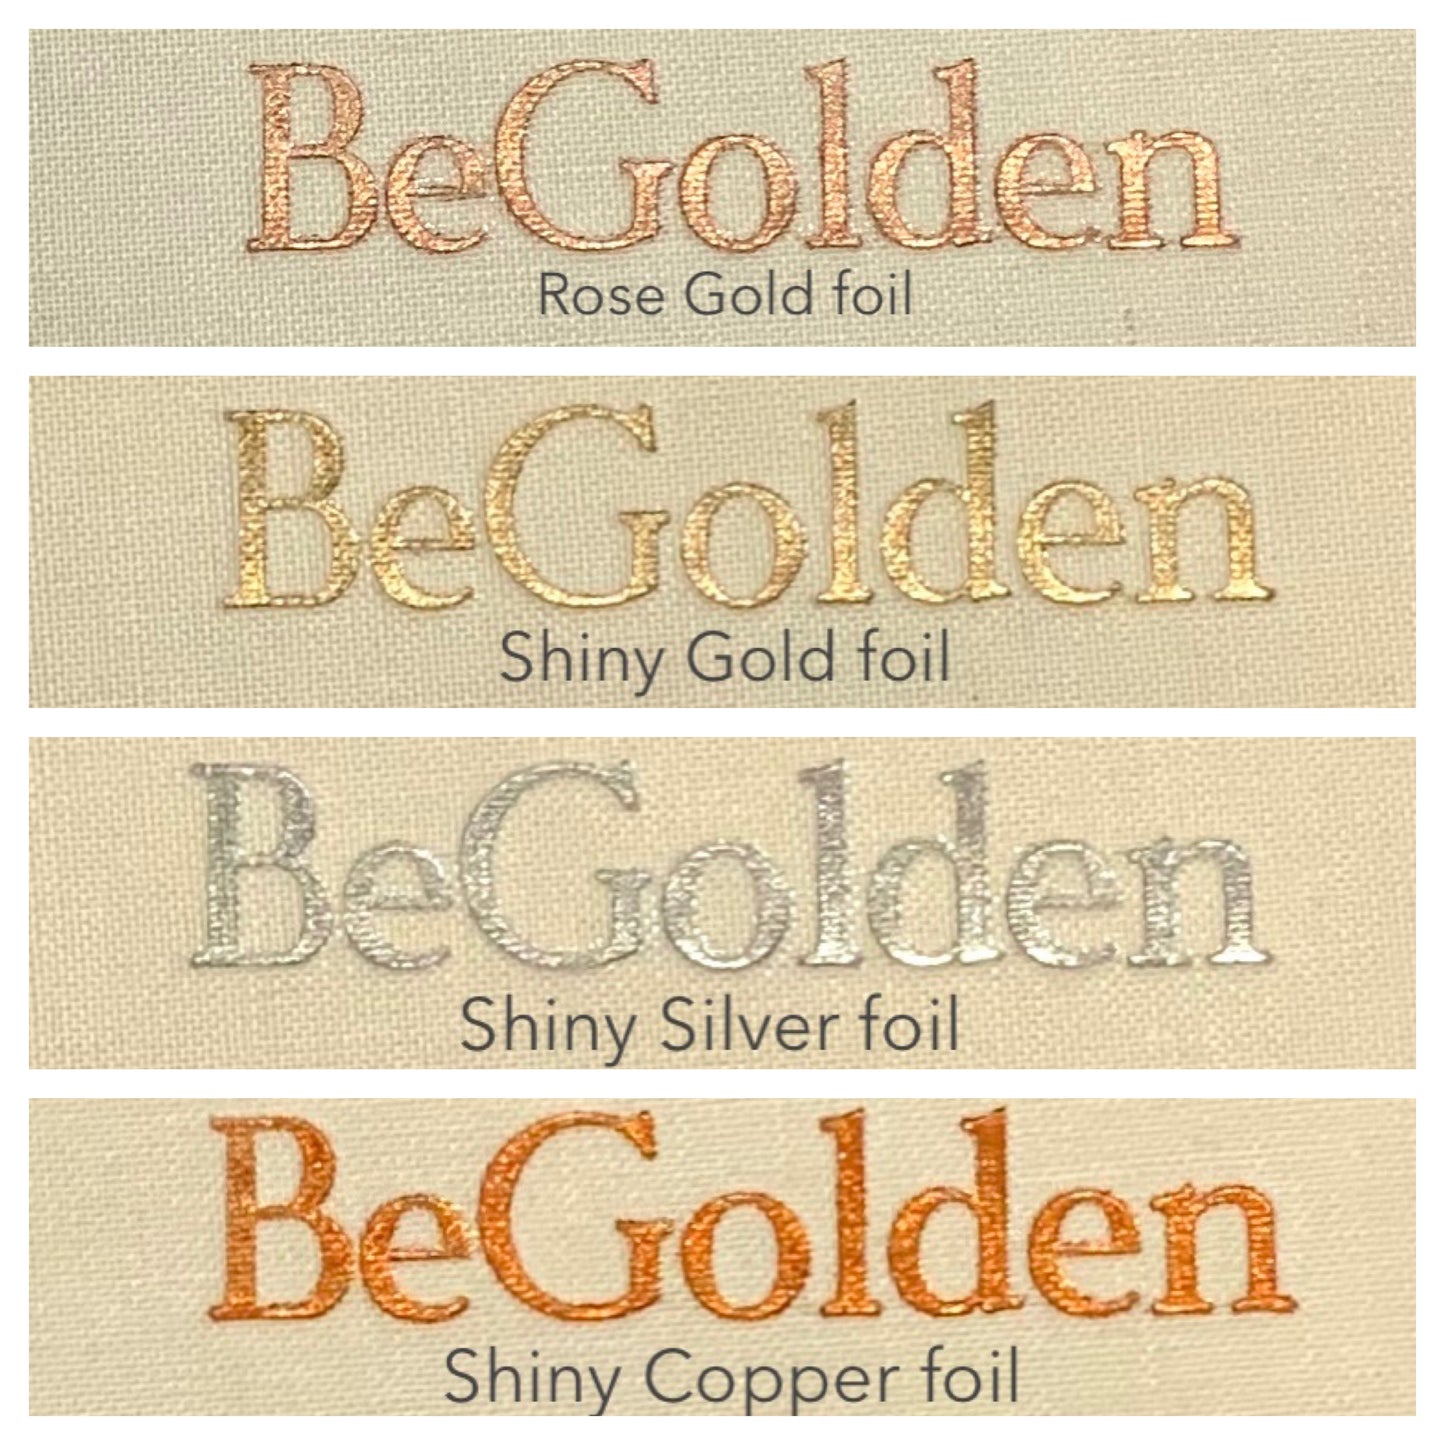 Begolden has been printed in four hotfoil colours to show the ramge that's available